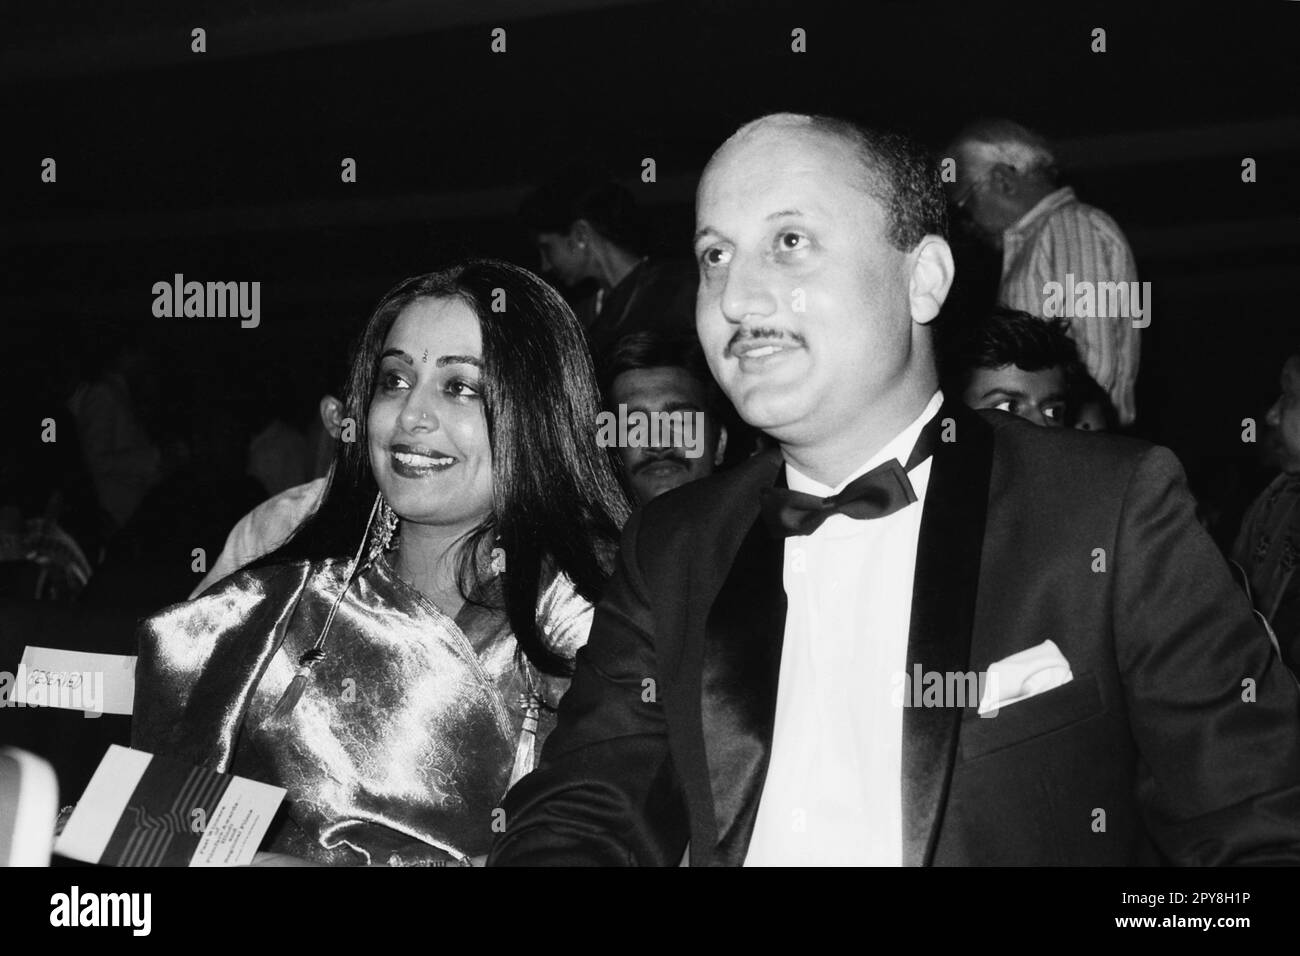 Indian old vintage 1980s black and white bollywood cinema hindi movie film actor, India, Anupam Kher, Indian actor, Kiran Kher wife, India Stock Photo